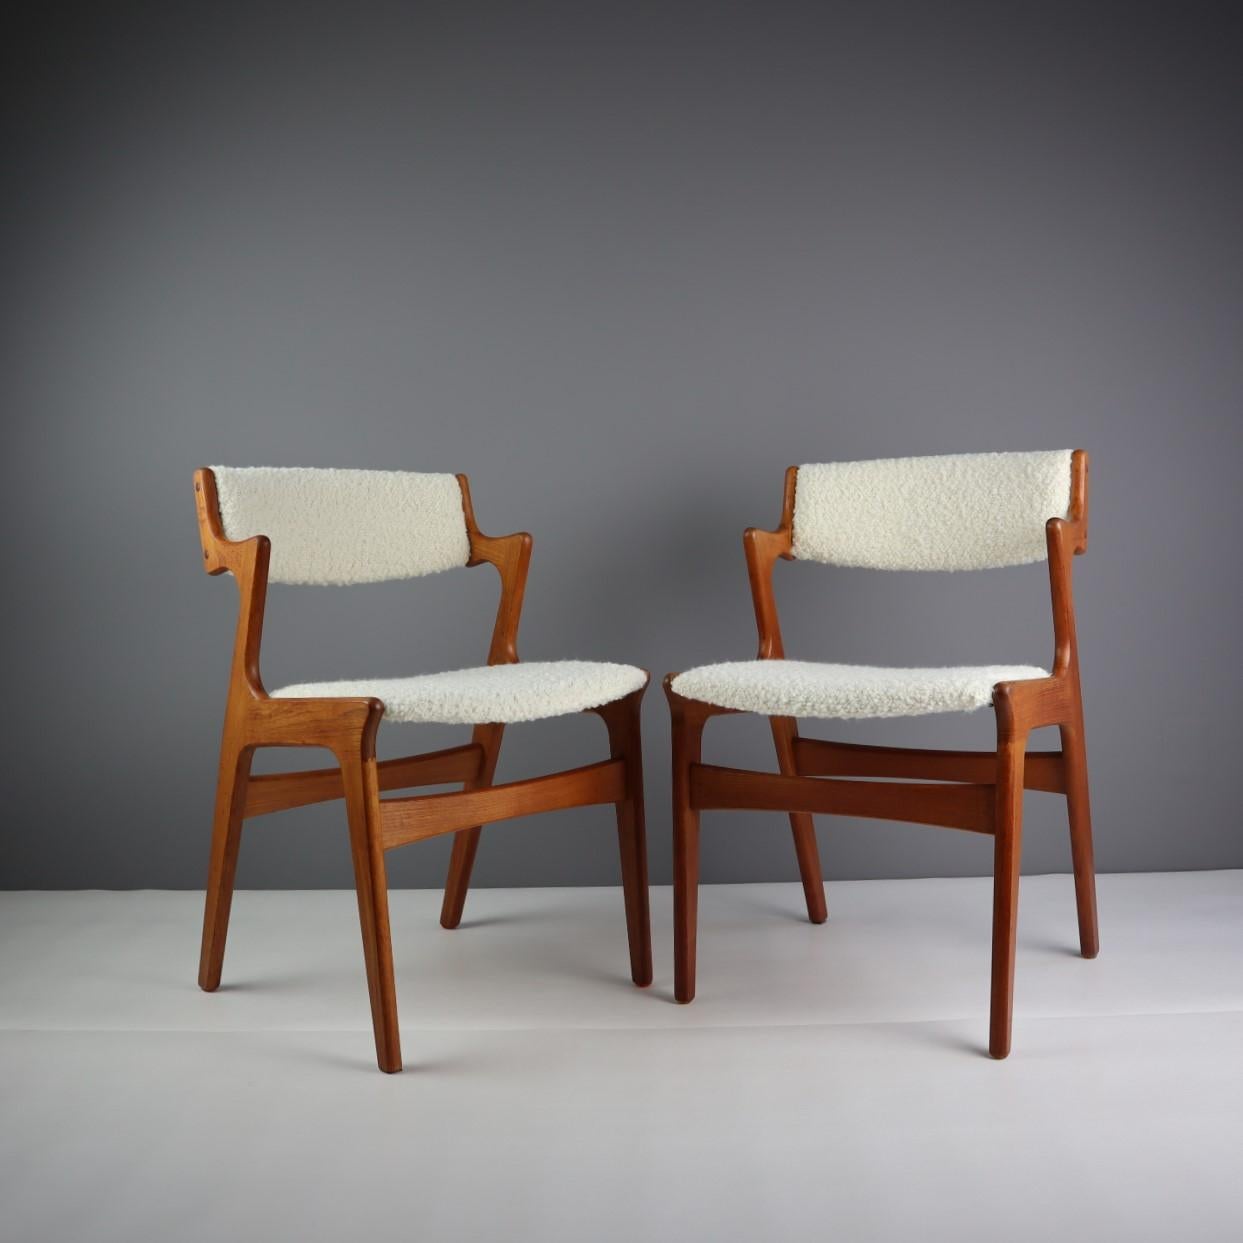 Pair of Danish Mid-Century Teak Dining Chairs In Good Condition For Sale In Stockholm, SE